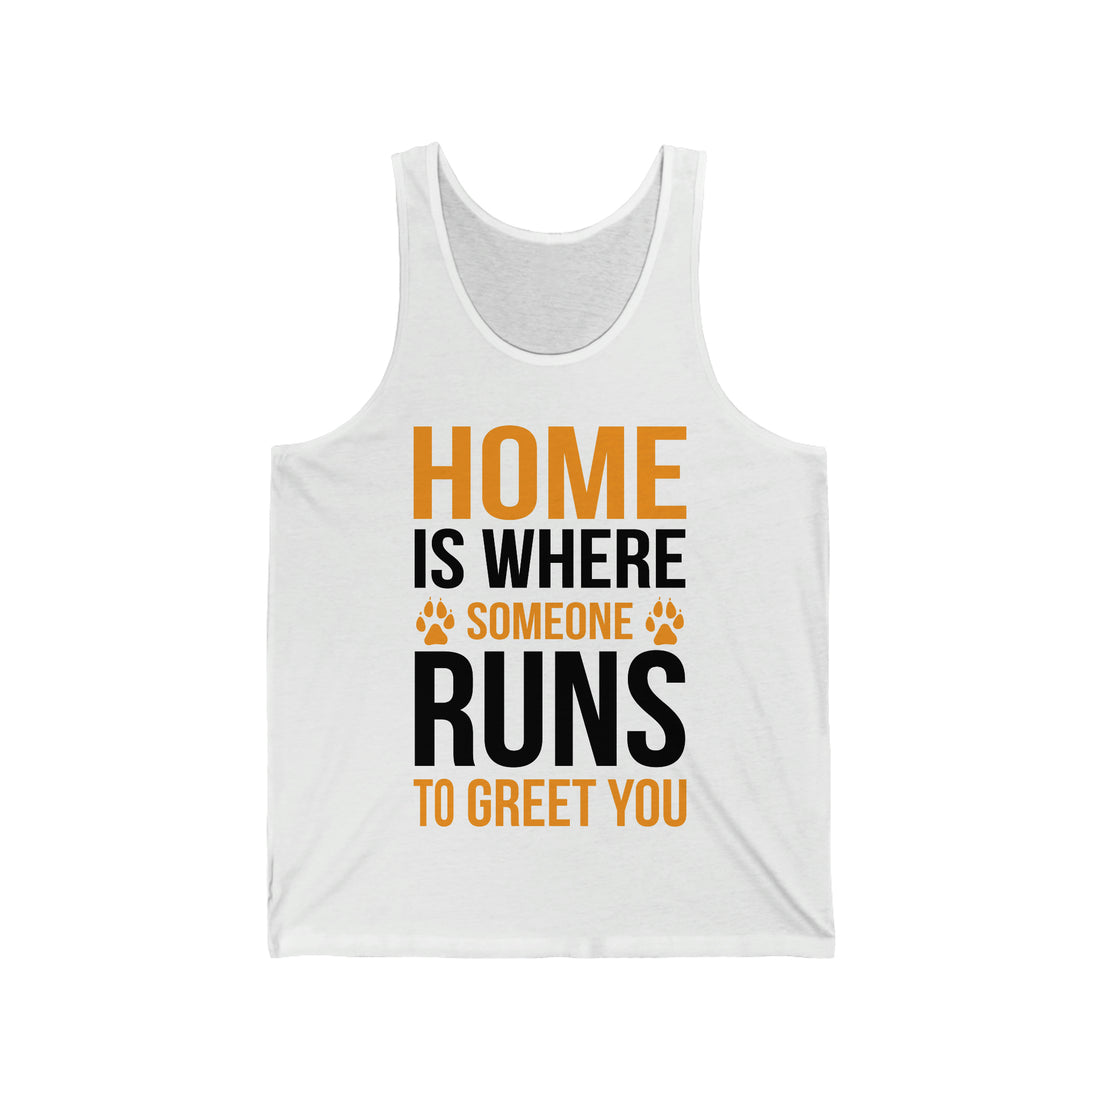 Home Is Where Someone Runs To Greet You - Unisex Jersey Tank Top